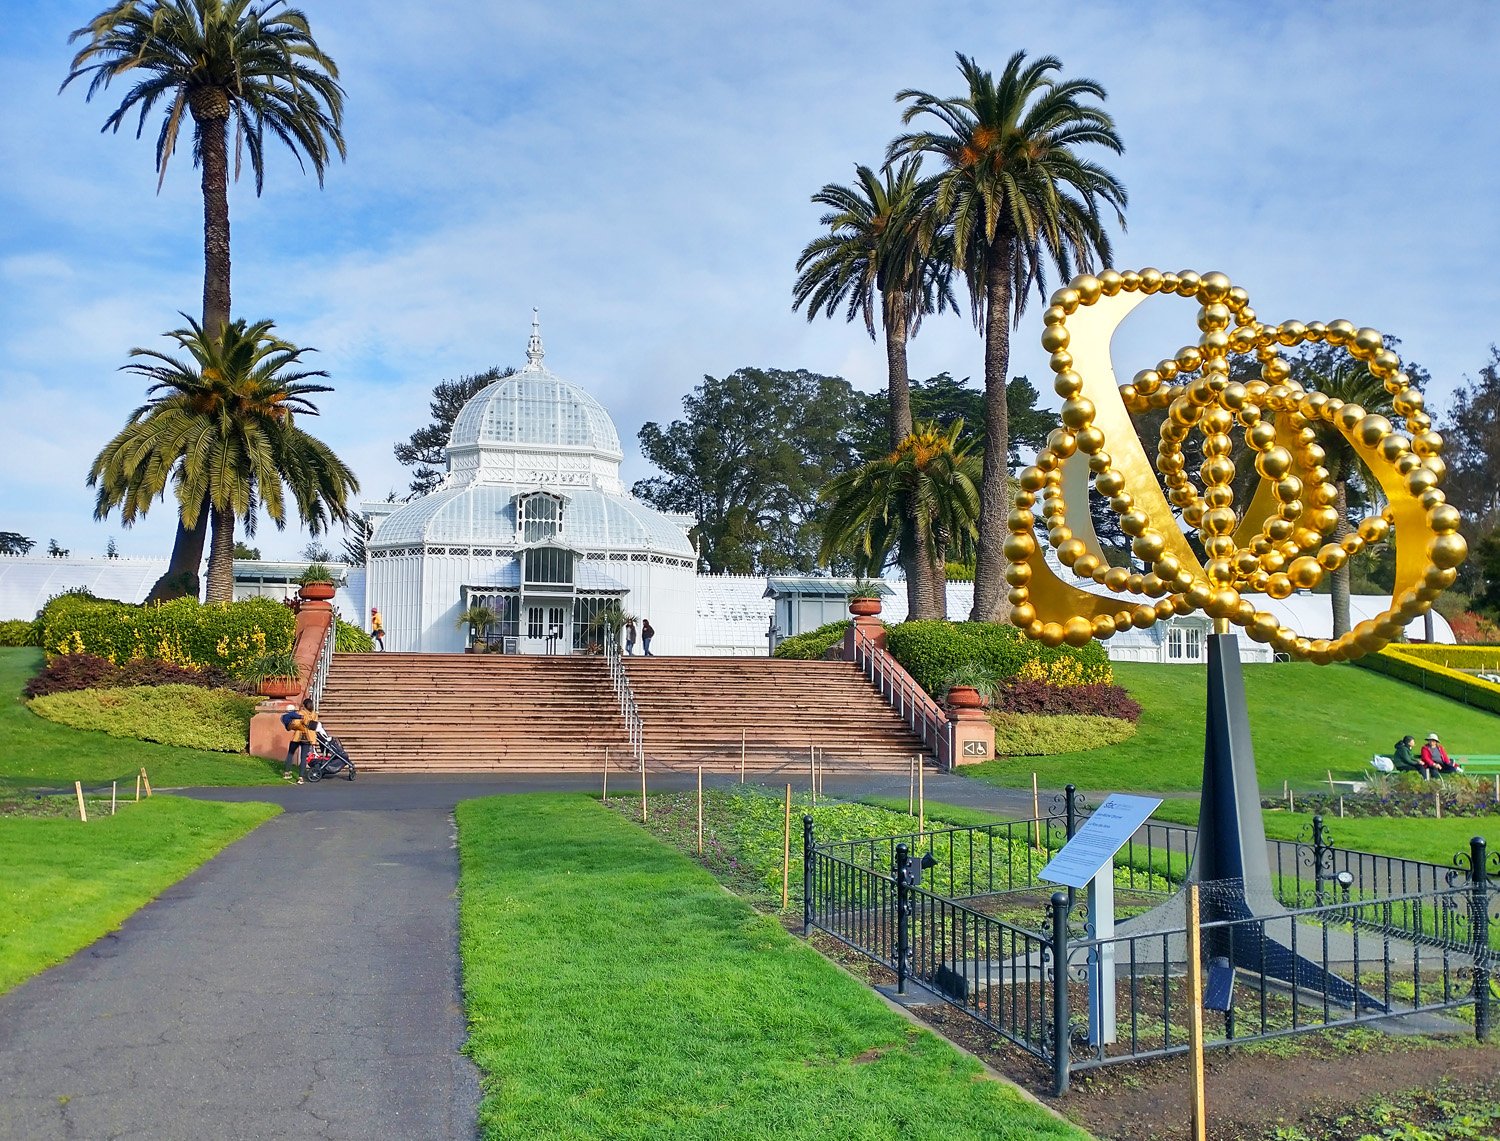 Conservatory of Flowers, in Golden Gate Park.